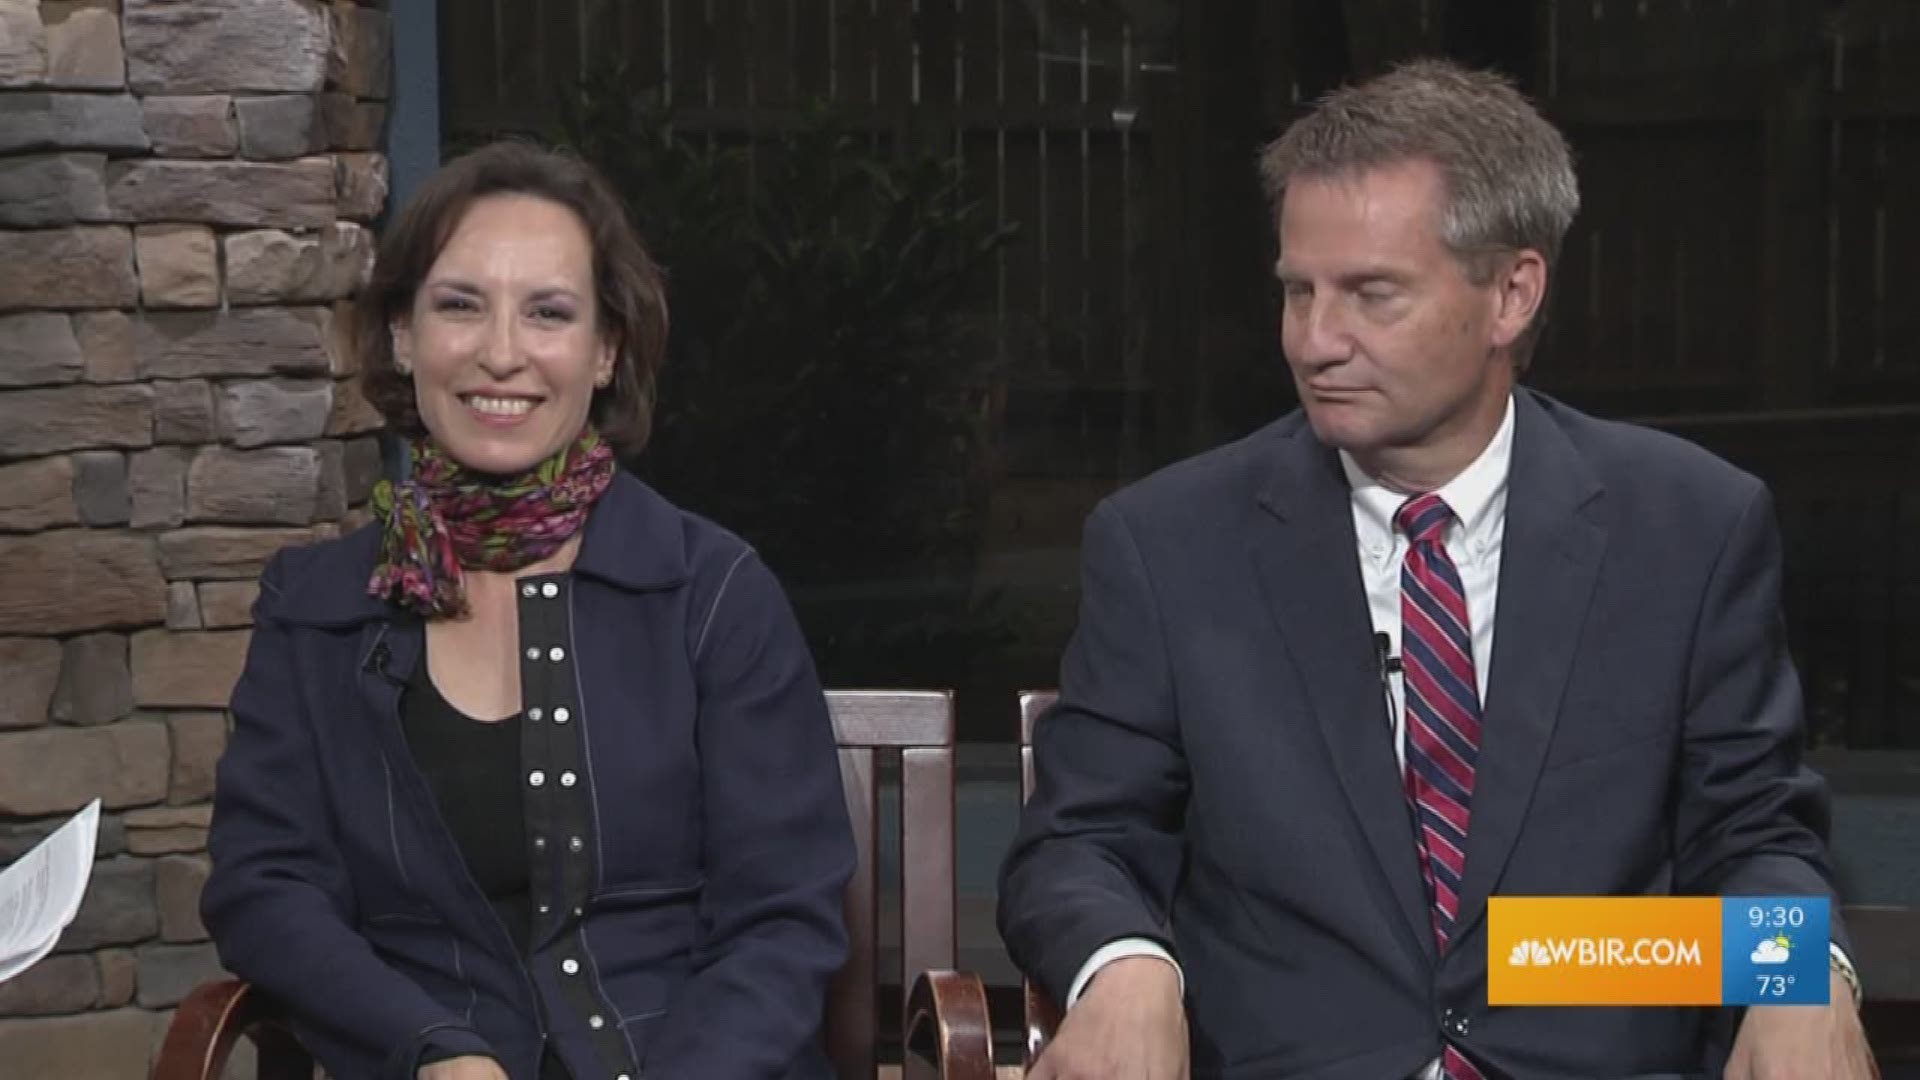 2nd Congressional District candidates Renee Hoyos and Tim Burchett talk about their candidacies.